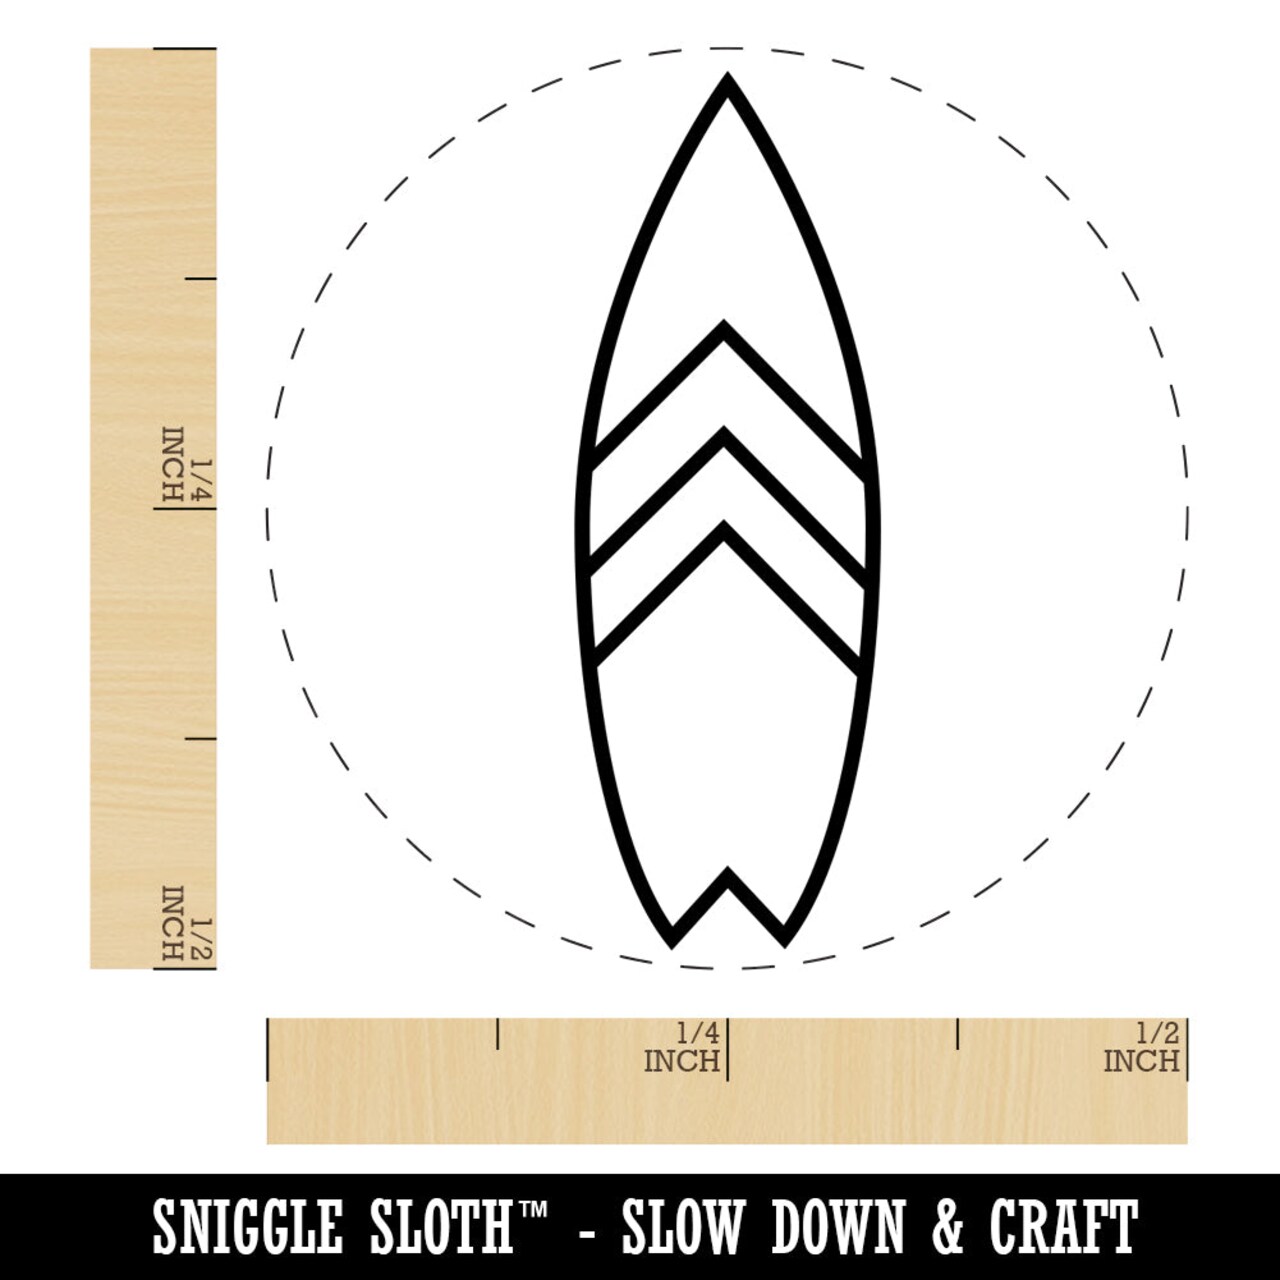 Stylish Surfboard Self-Inking Rubber Stamp for Stamping Crafting Planners